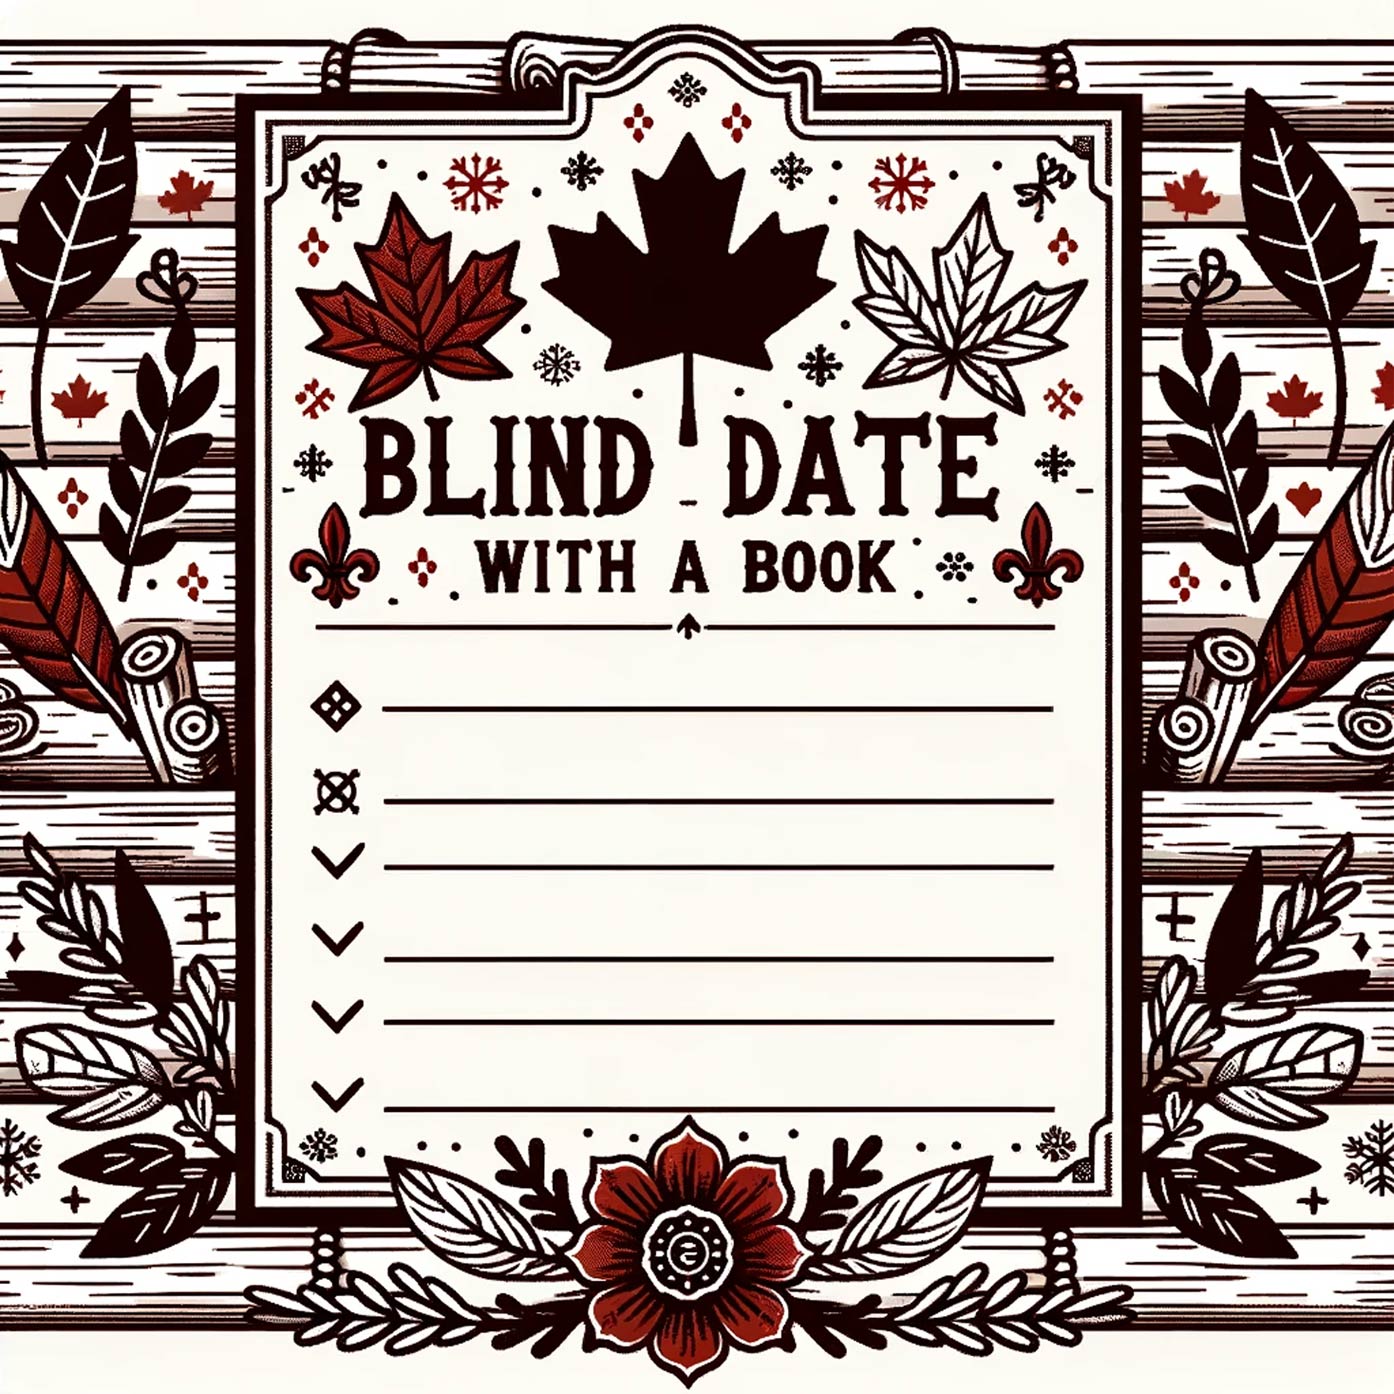 Blind Date With A Book Free Template - Canadian